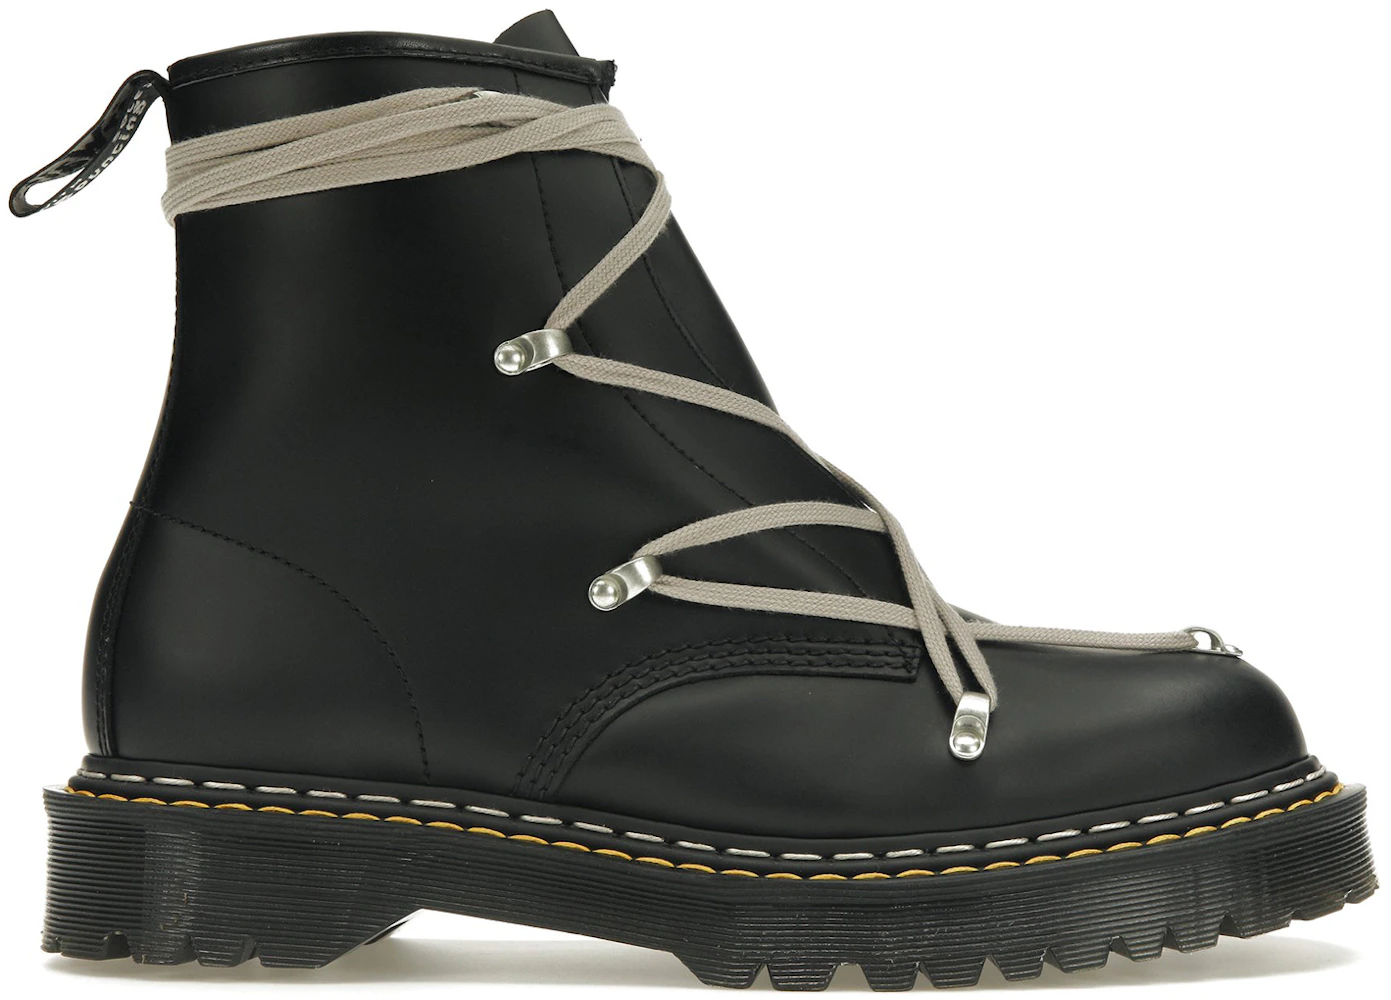 micro cabine Wereldrecord Guinness Book Dr. Martens 1460 Bex Leather Boot Rick Owens Men's - 27019001 - US